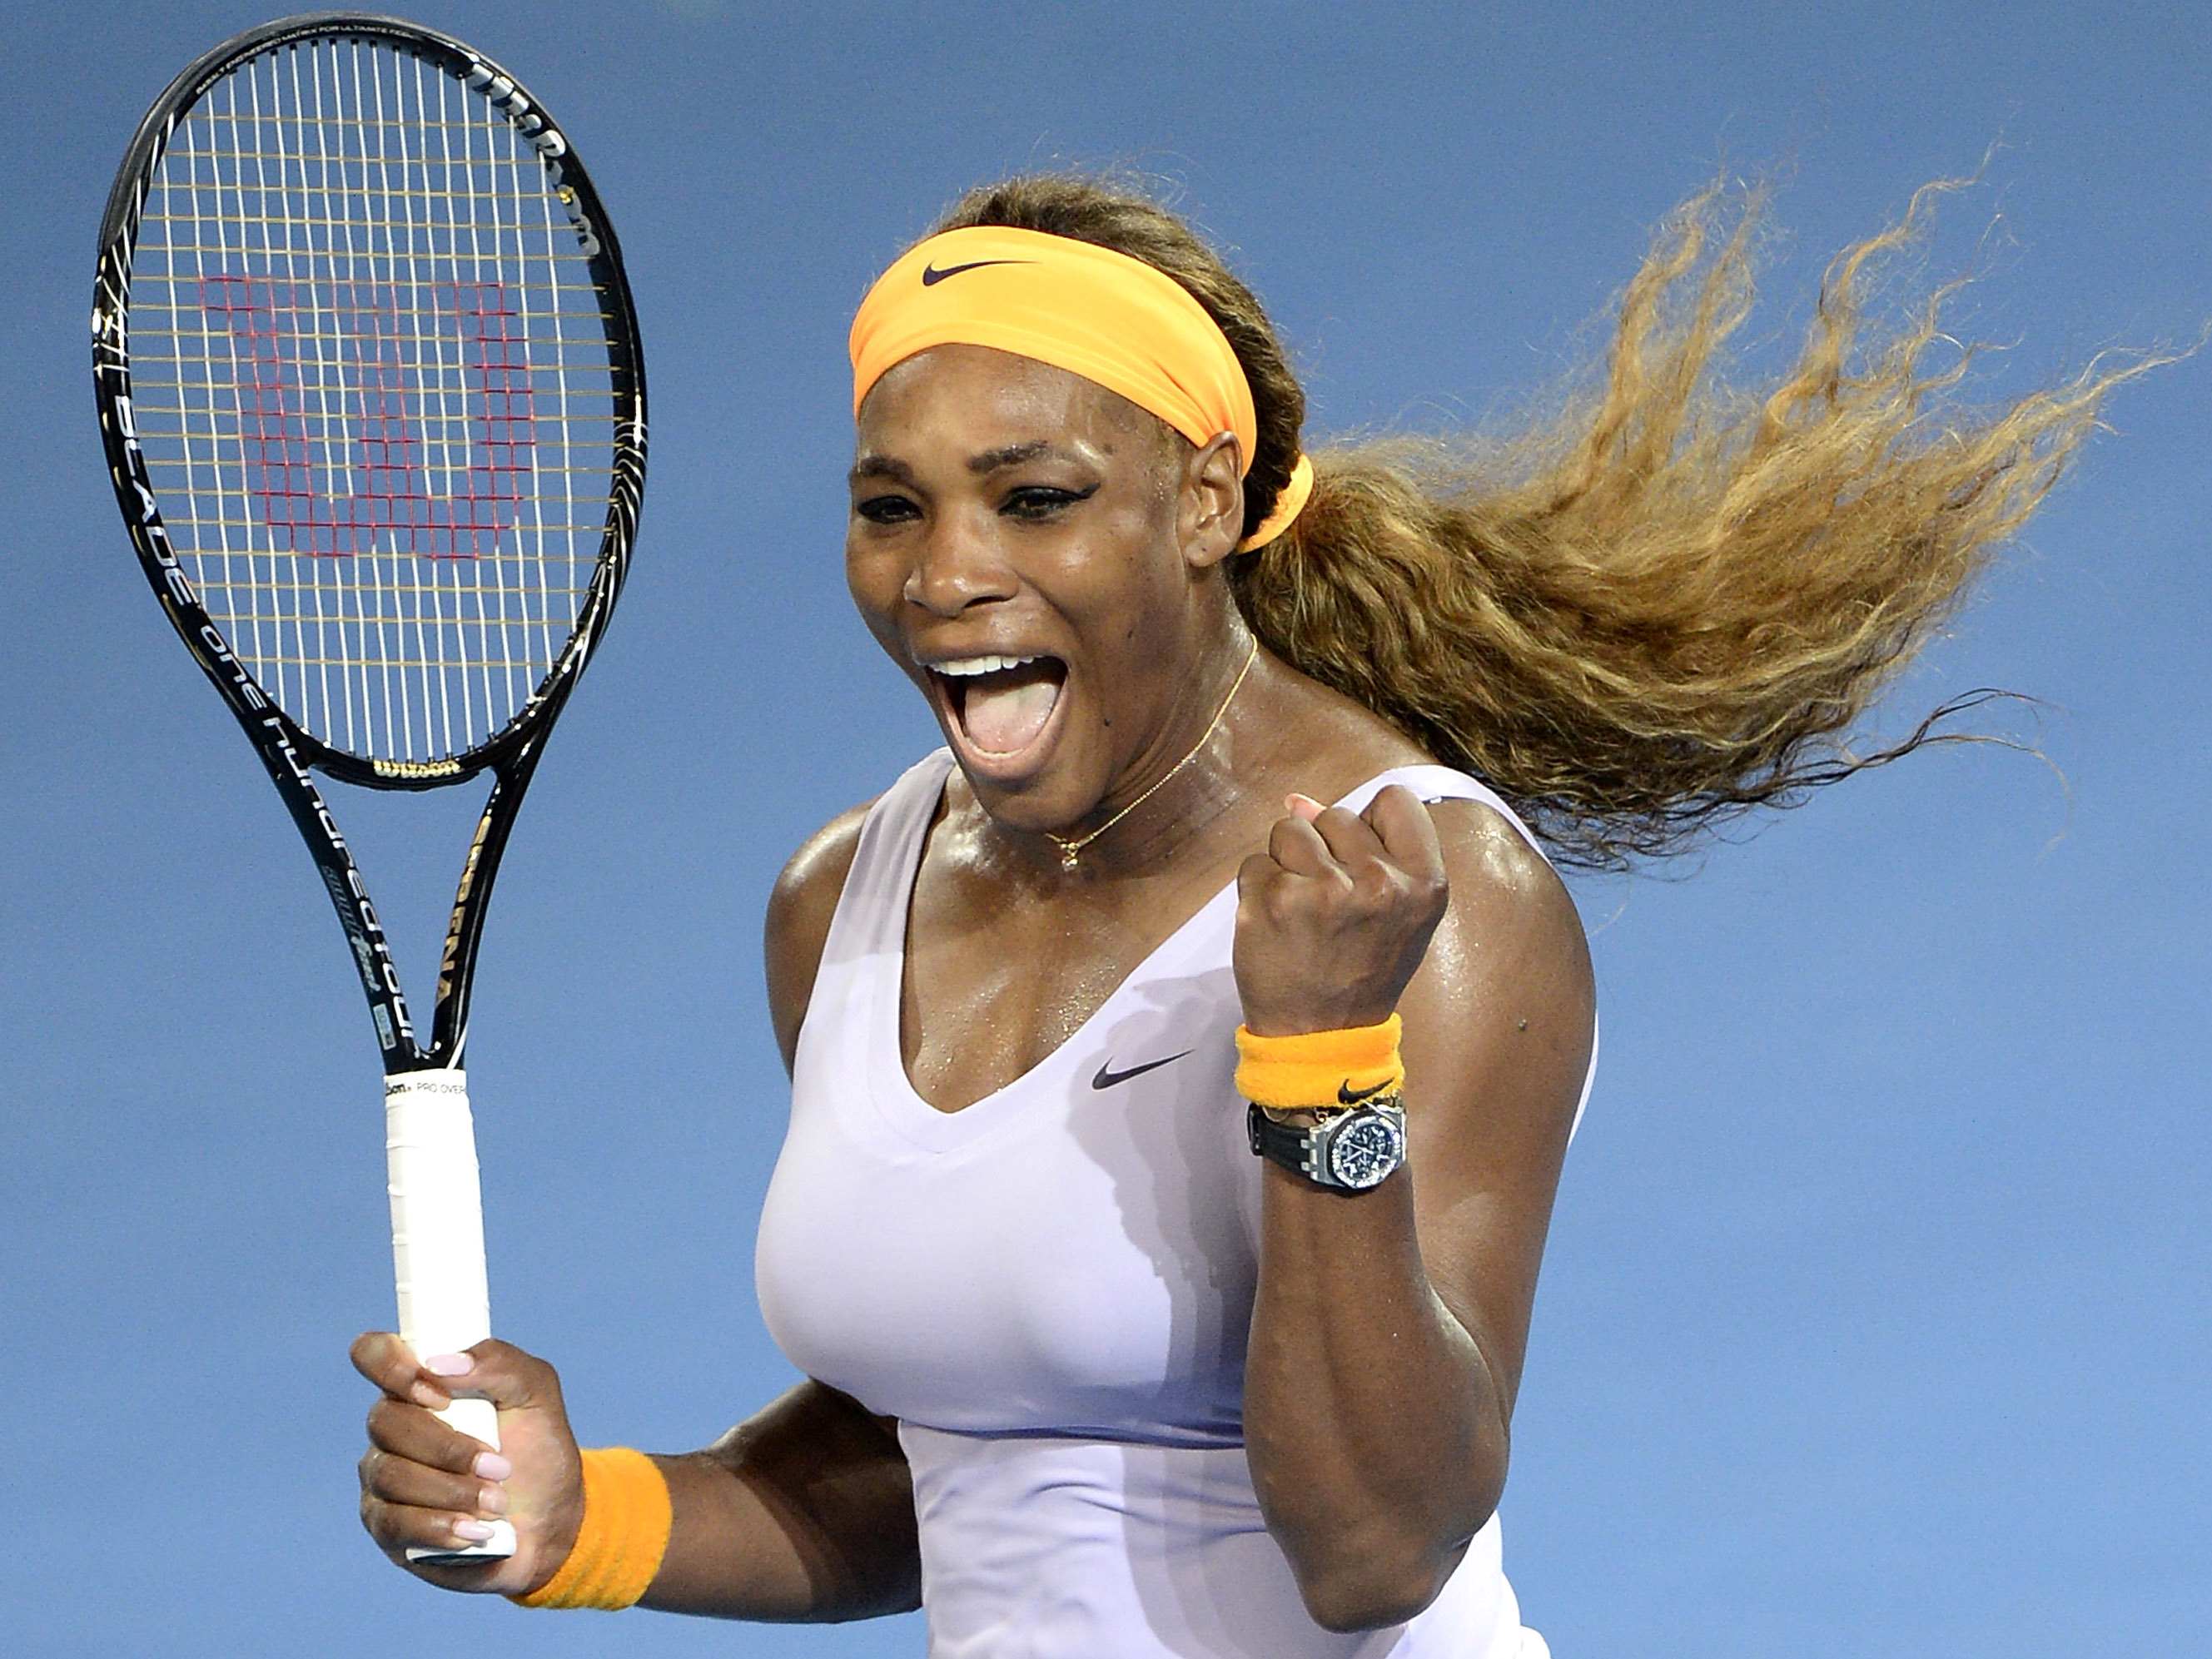 What are some of Serena Williams' best and most iconic tennis